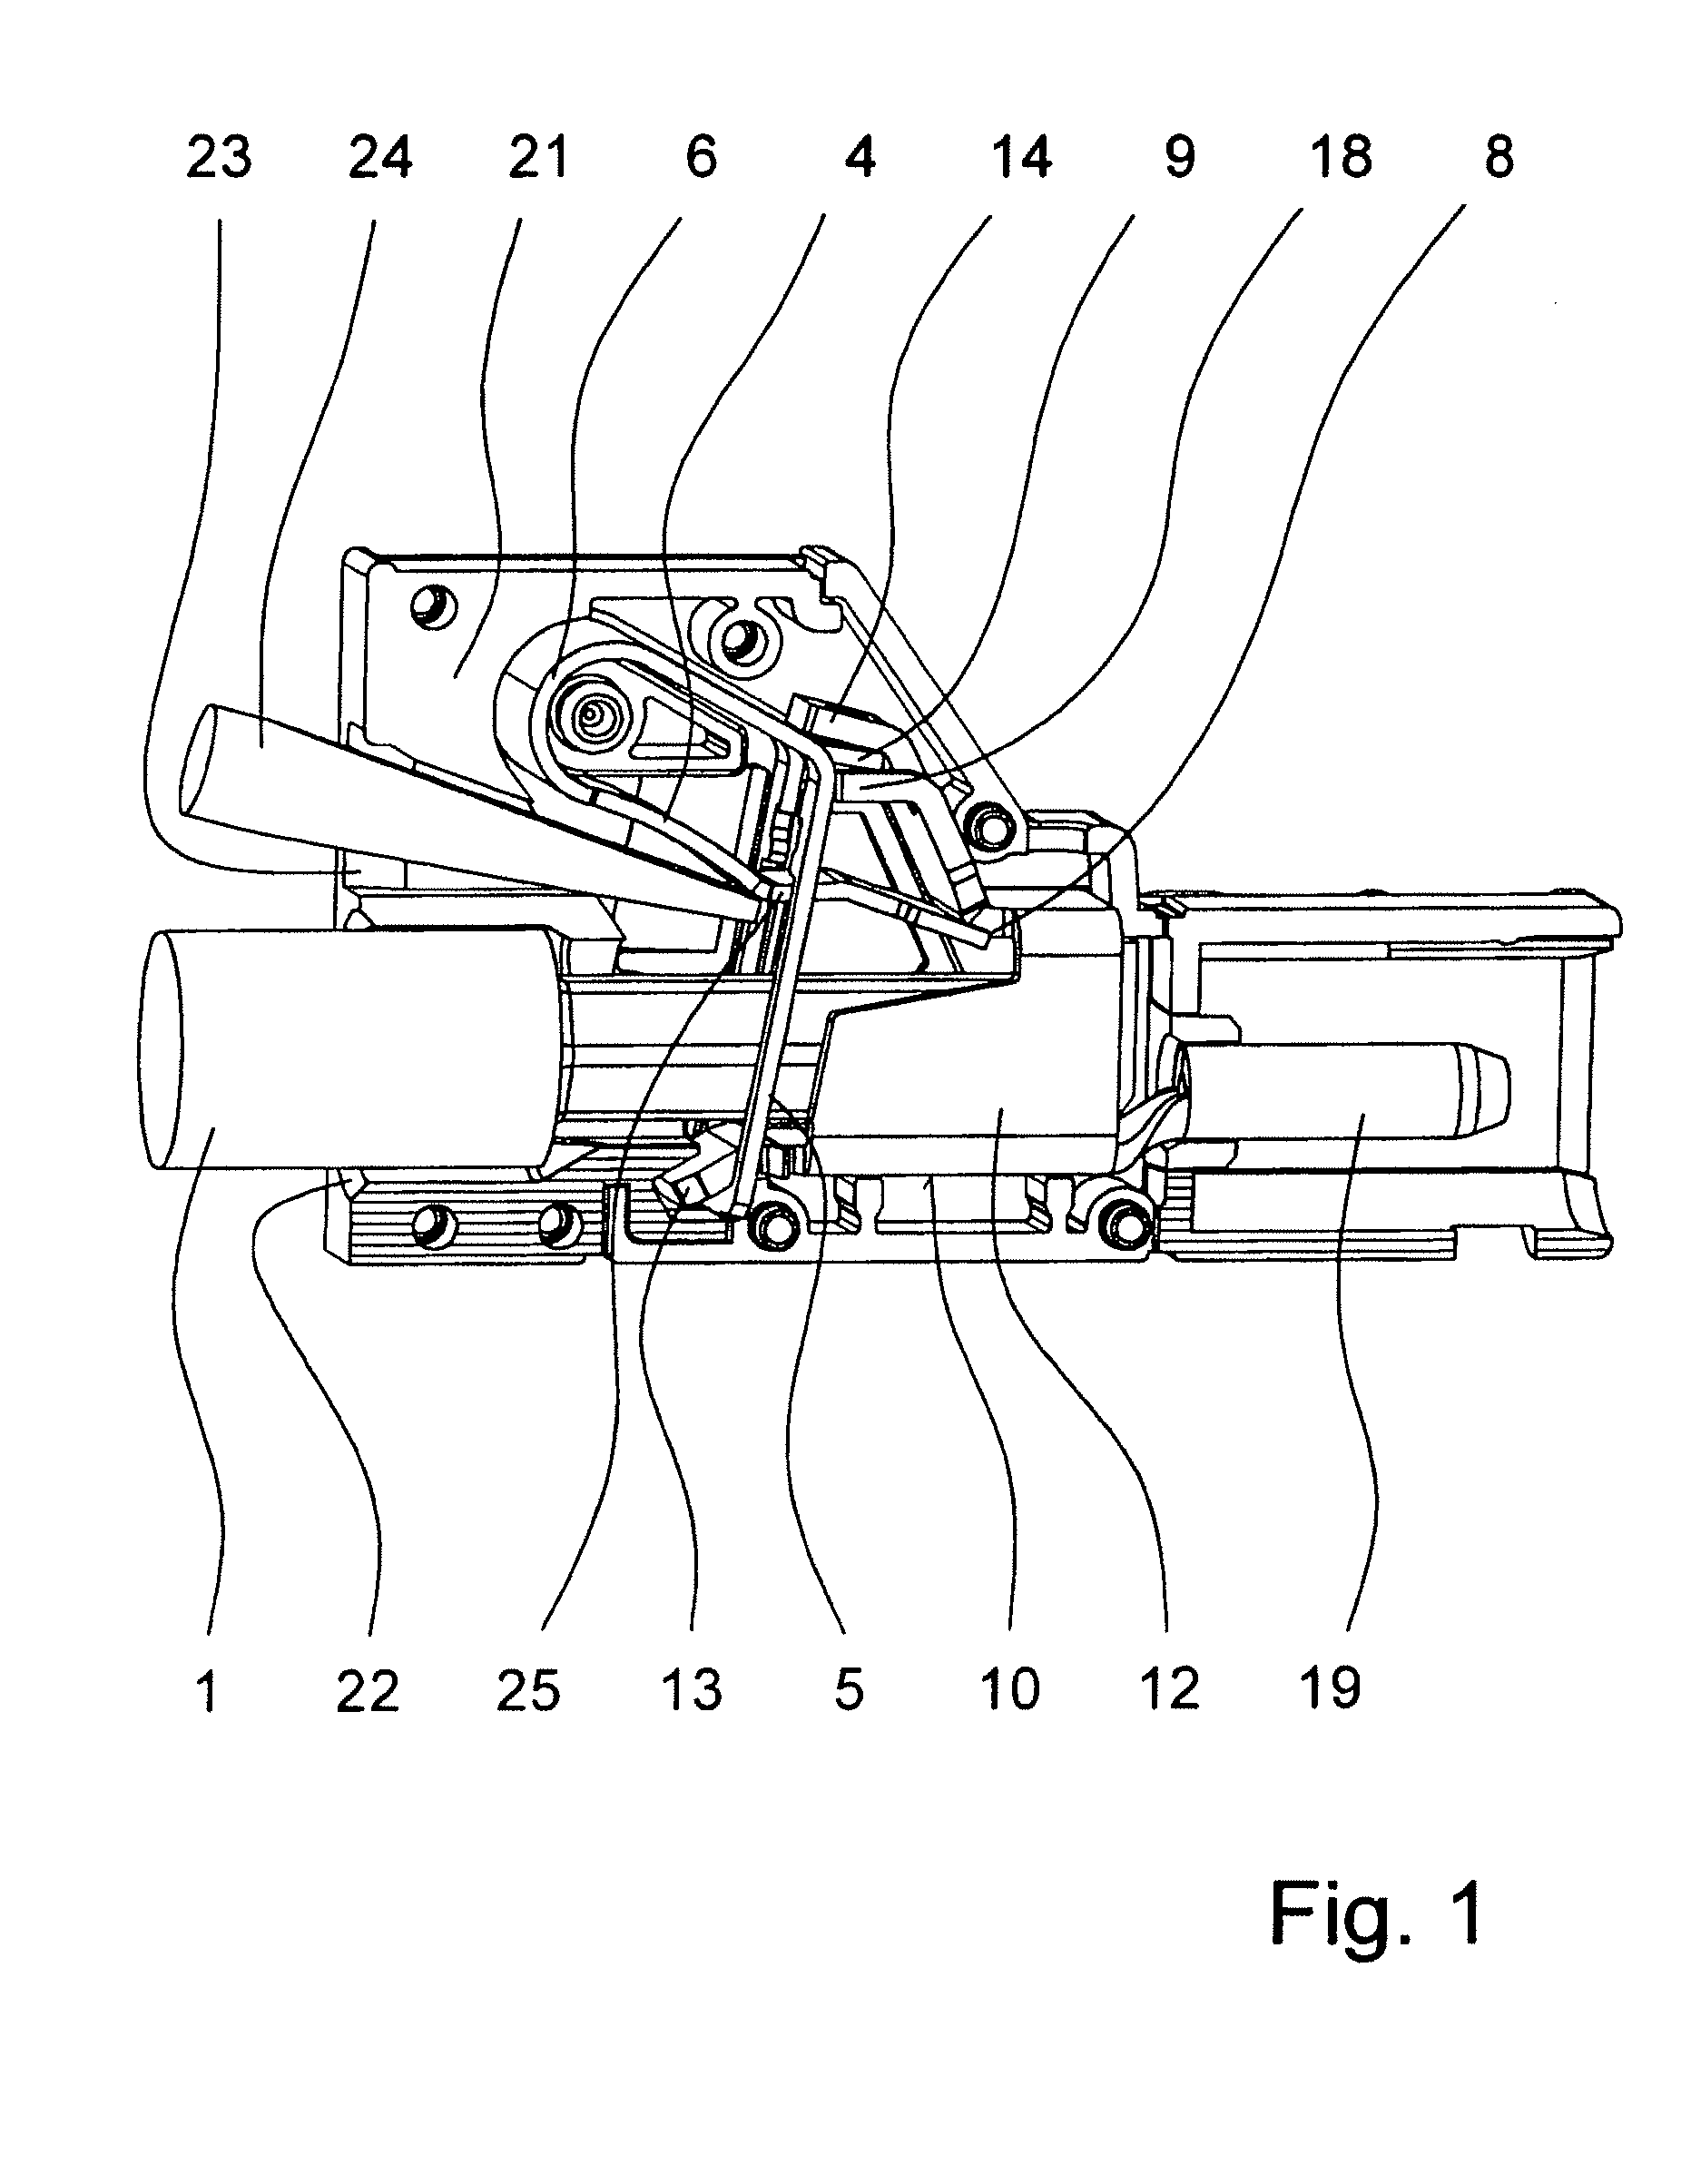 Electrical connection clamp or terminal clamp